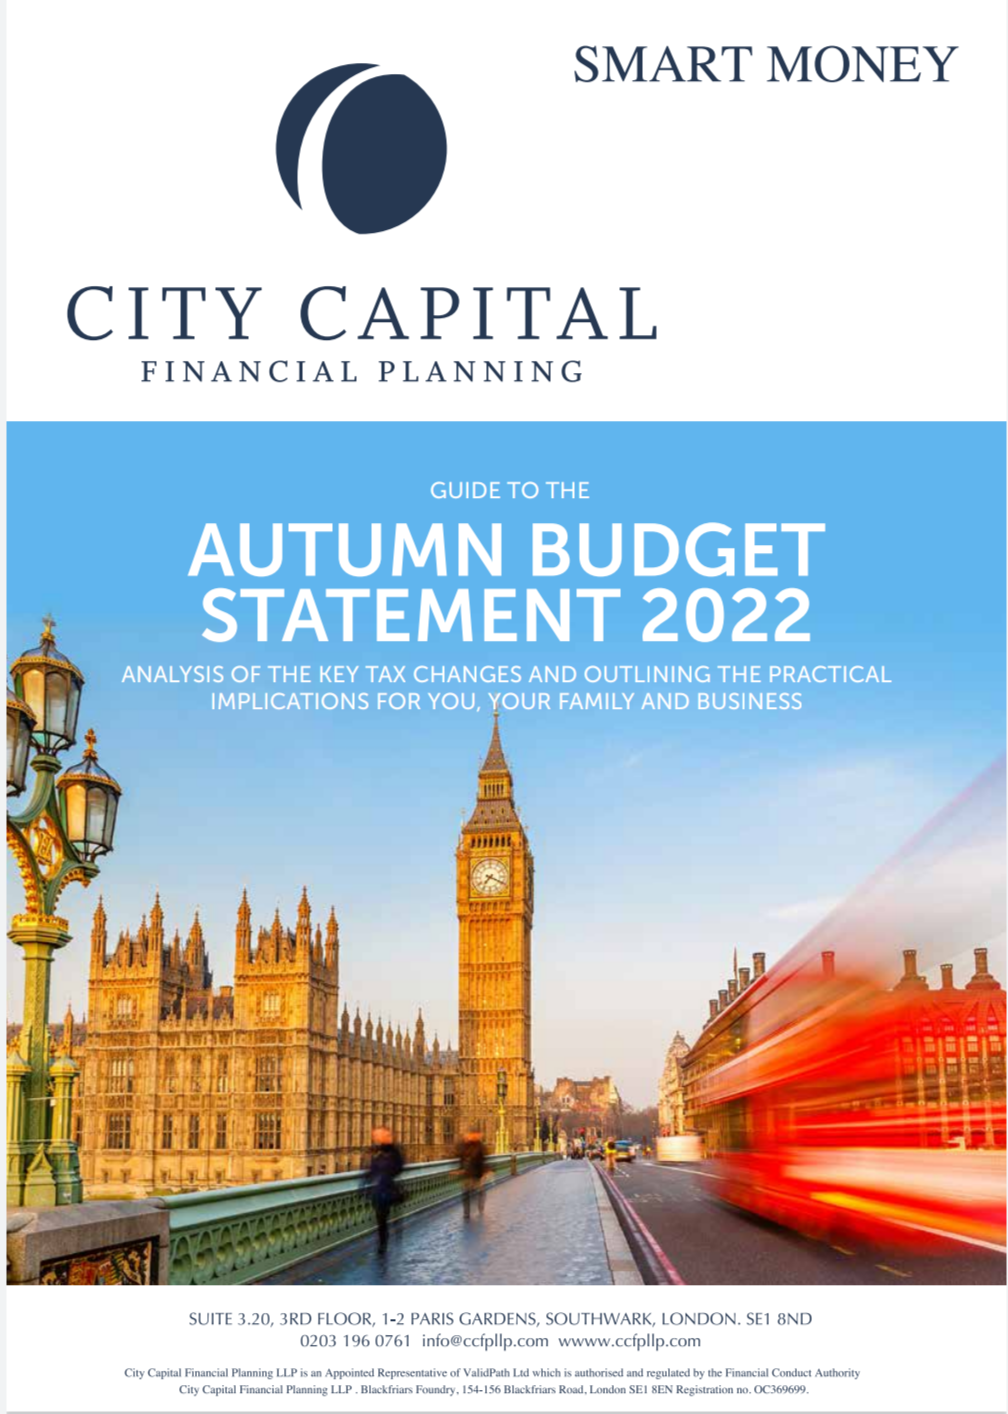 Guide to the Autumn Budget Statement 2022